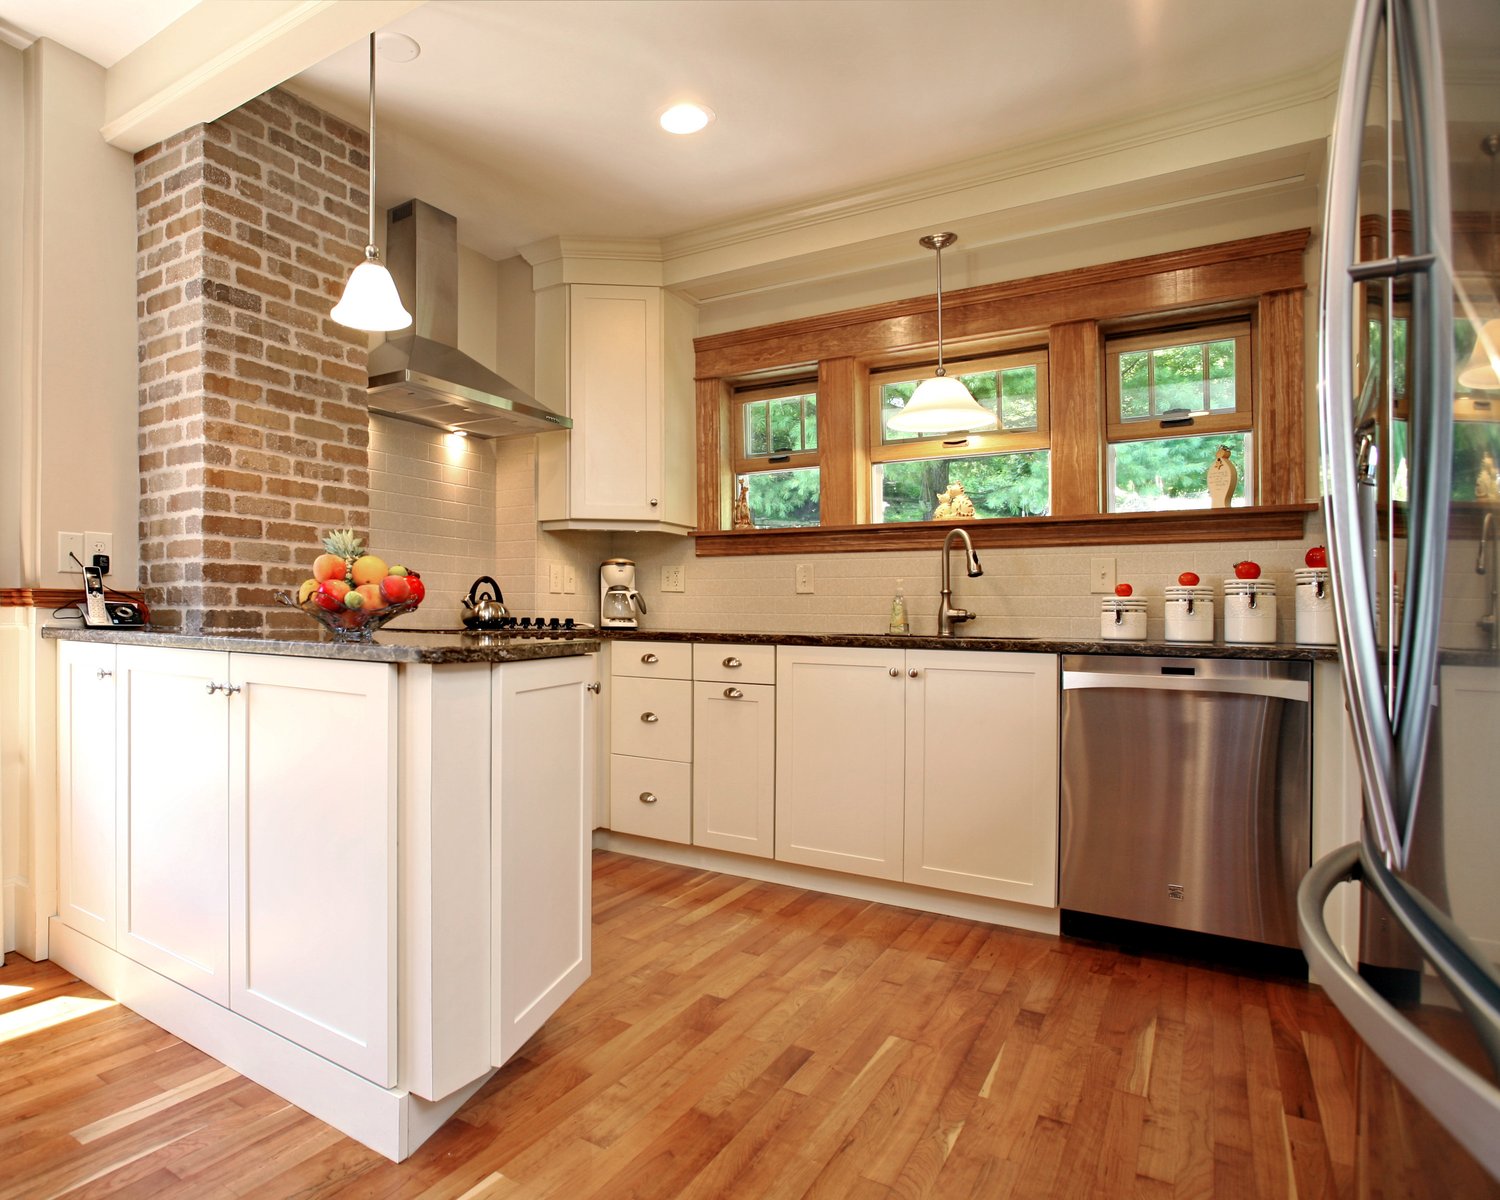 Creating a Casual New England Style Kitchen